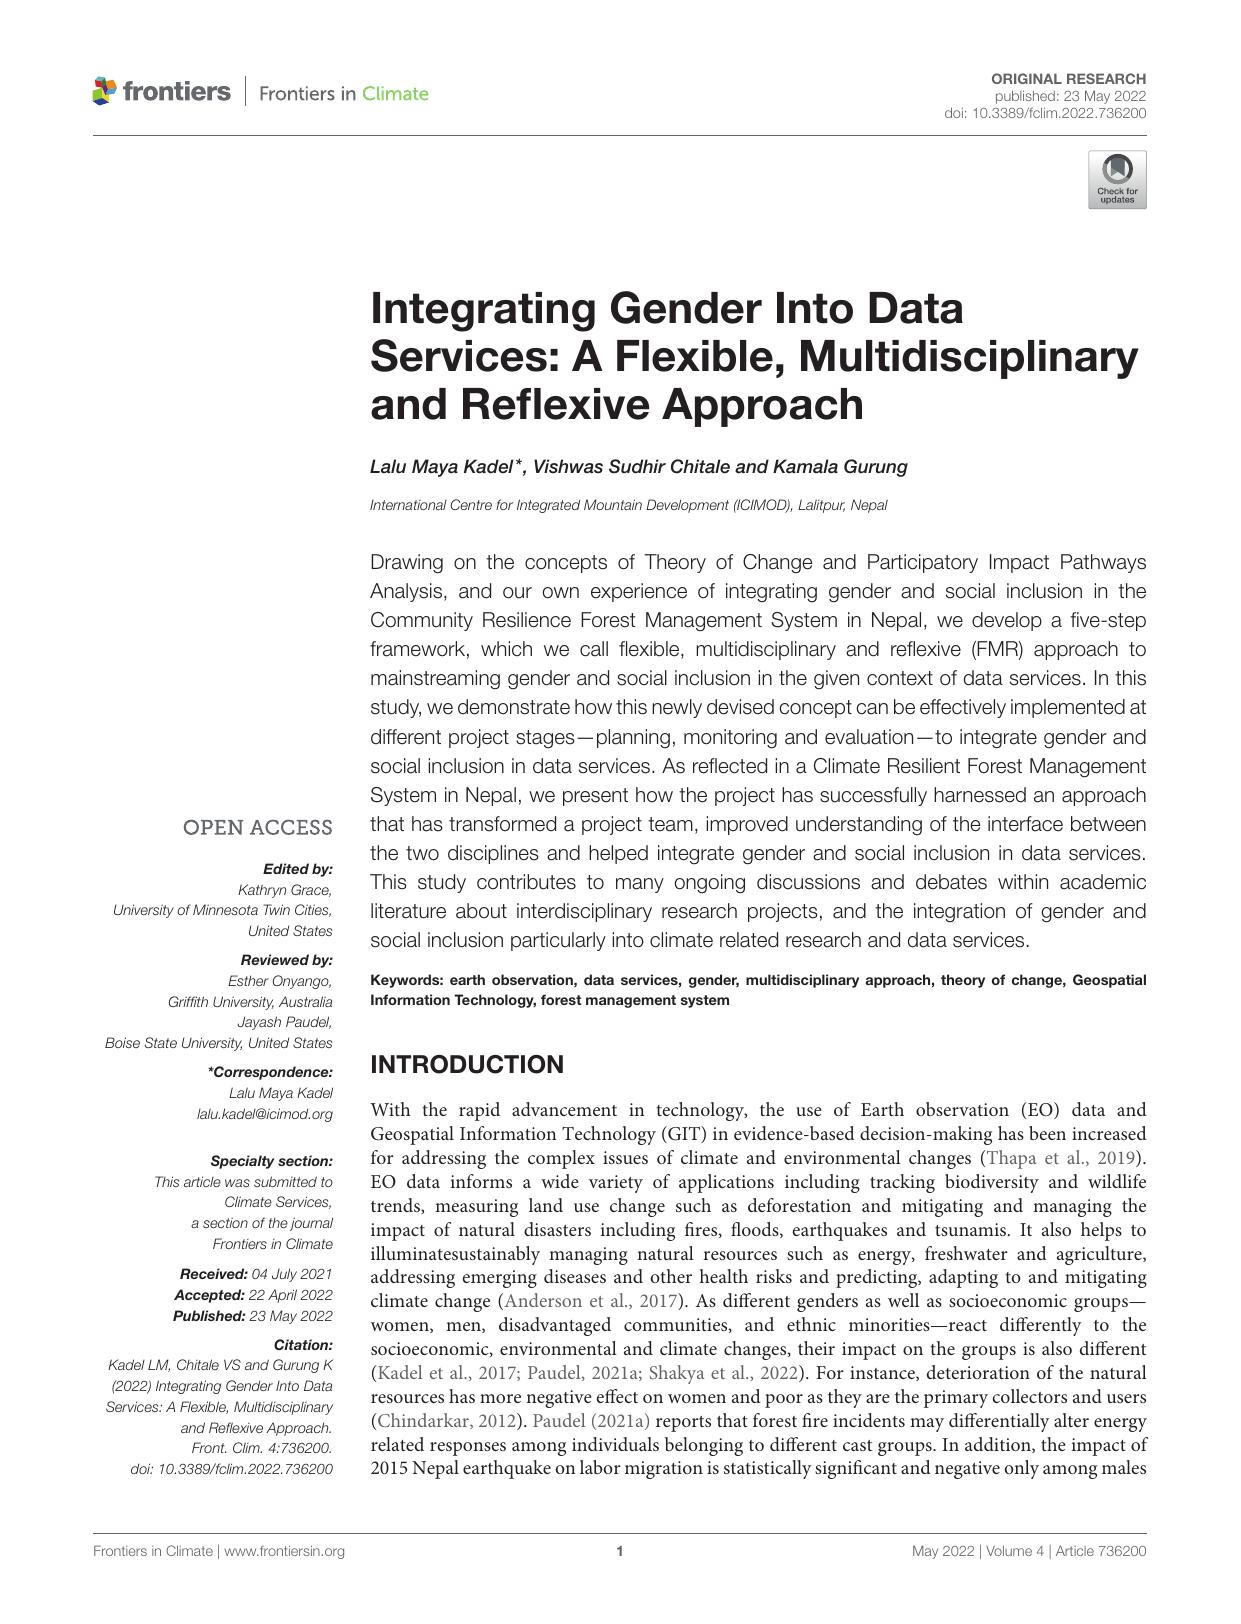 Integrating gender into data services: A flexible, multidisciplinary and reflexive approach